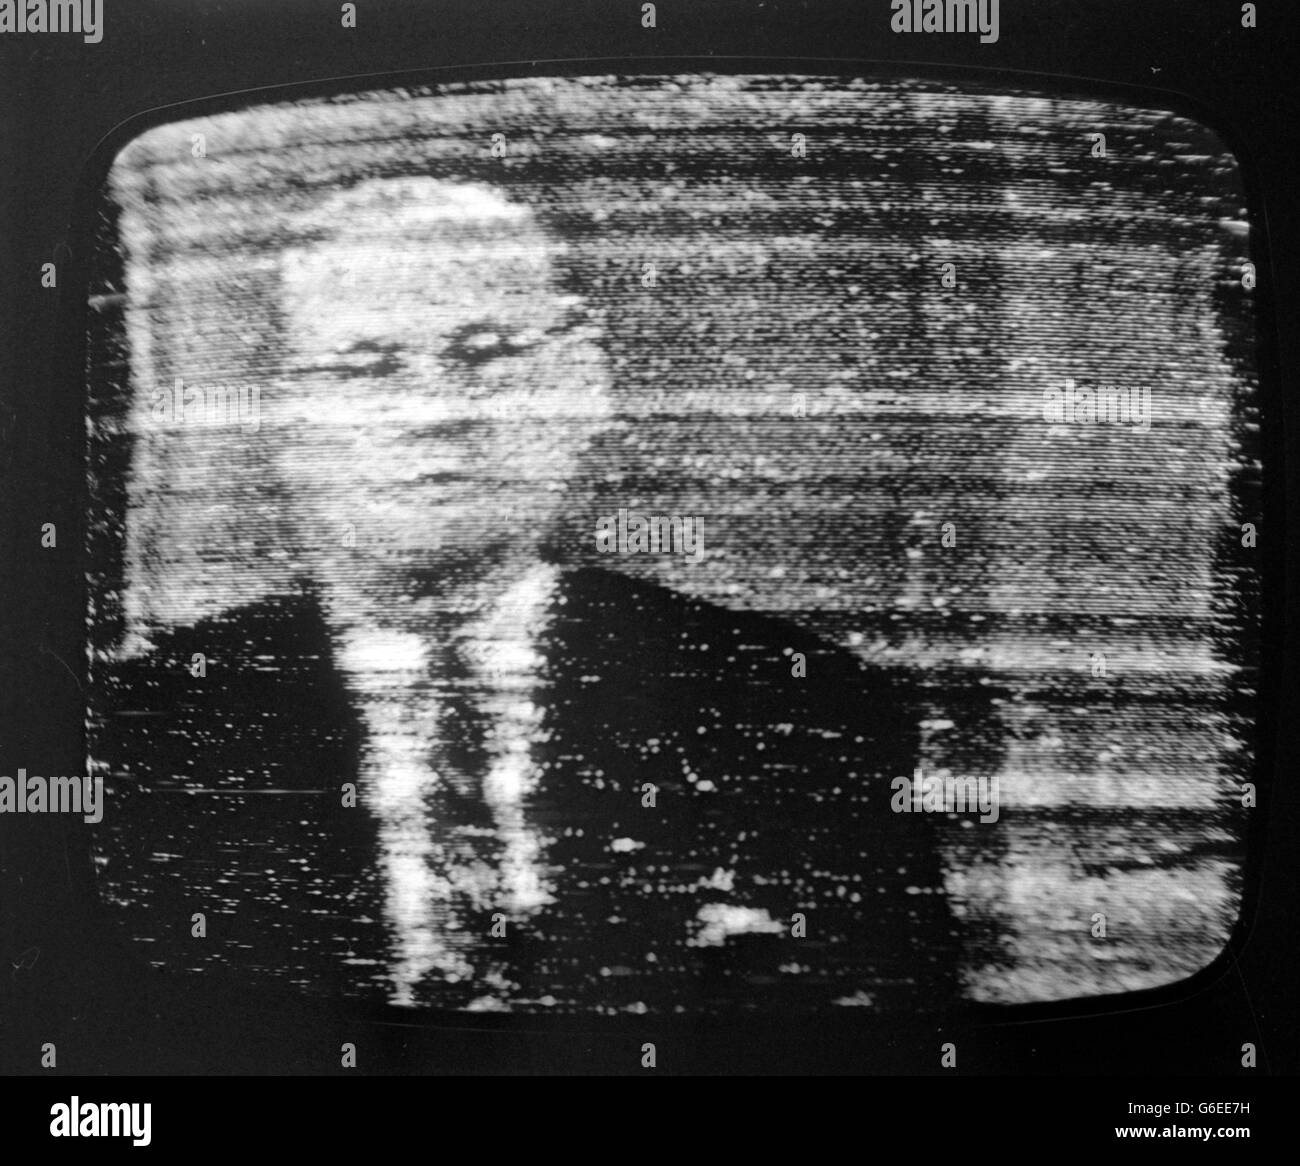 This is the picture that made TV history when it was received in Britain via Telstar satellite. The Subject is Mr Frederick Kappel, chairman of the American Telephone and Telegraph Company. Stock Photo